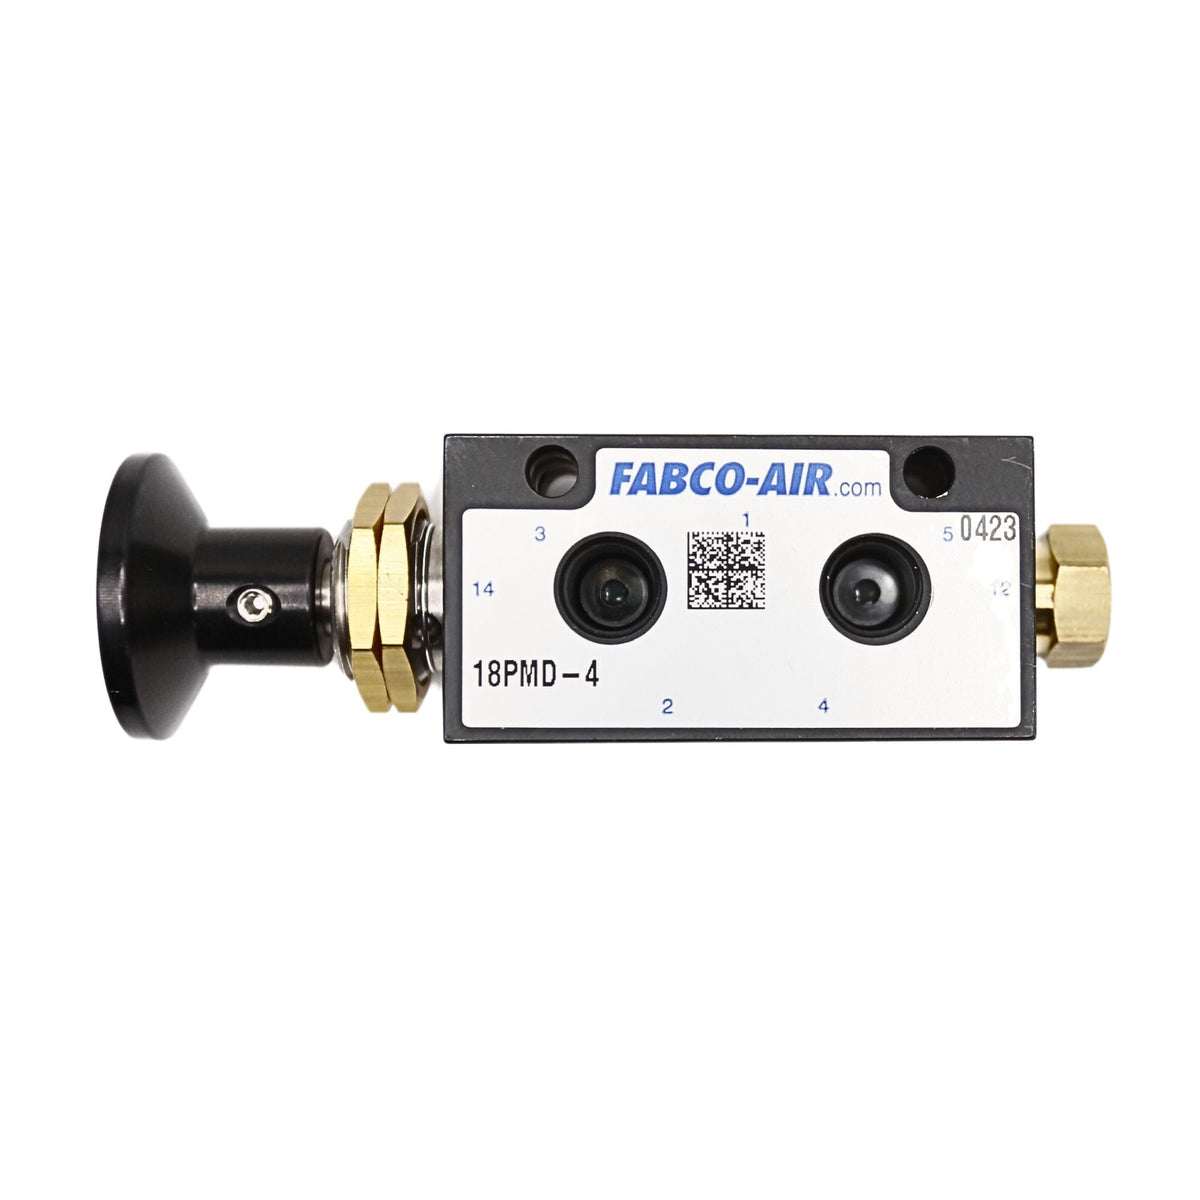 Fabco | Inline 4/2 Push Button, Detented, Panel Mount, 1/8 in NPTF | 18PMD-4 used on fabcoair product line